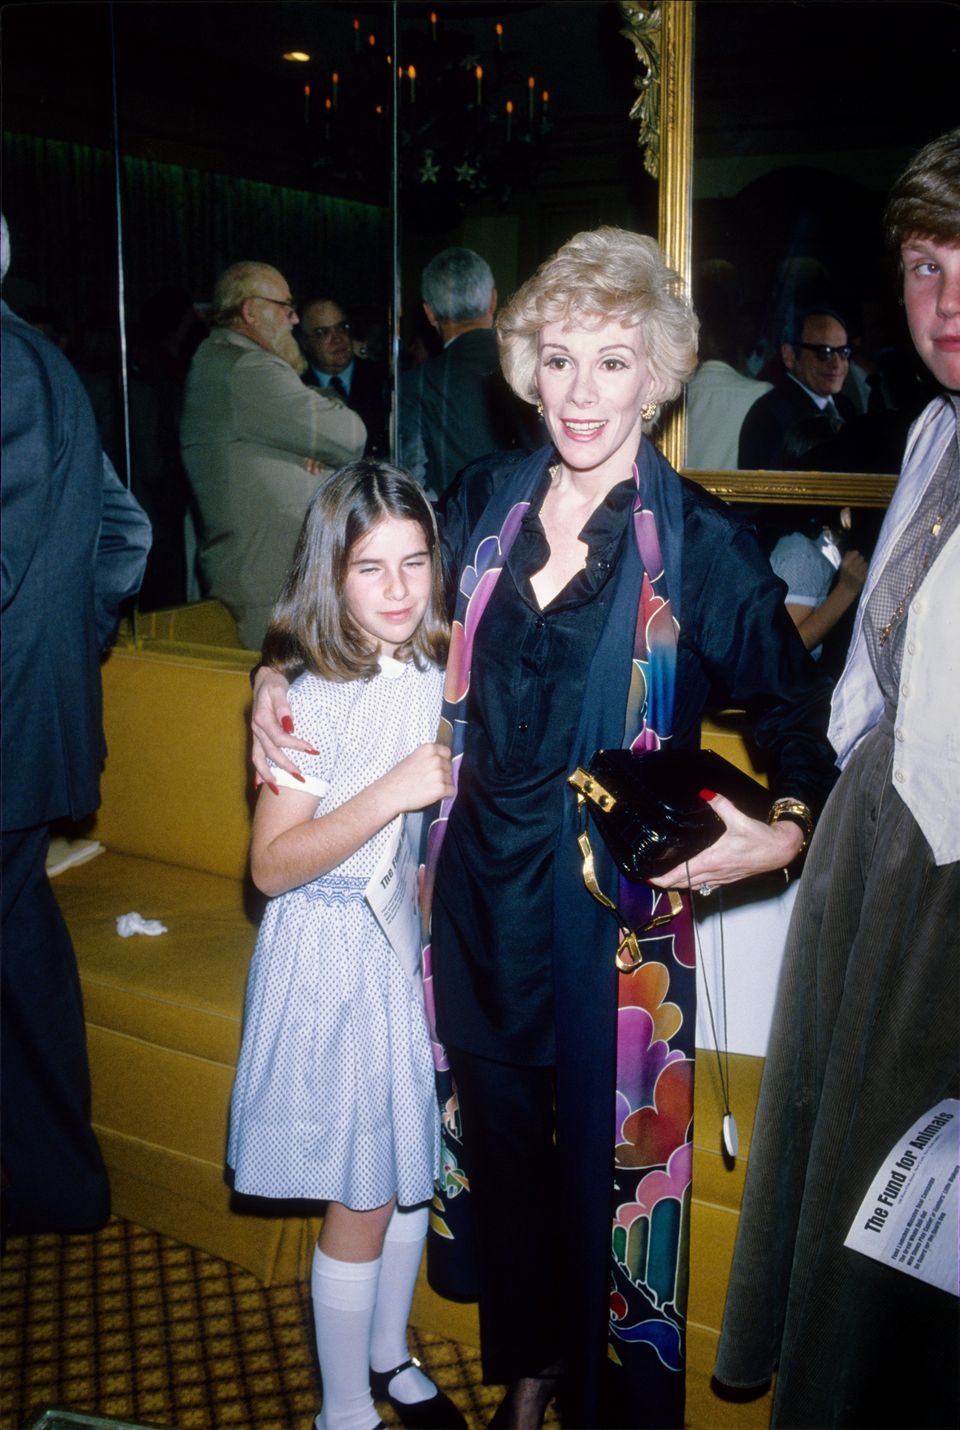 Iconic Photos Of Joan And Melissa Rivers Through The Years | HuffPost ...